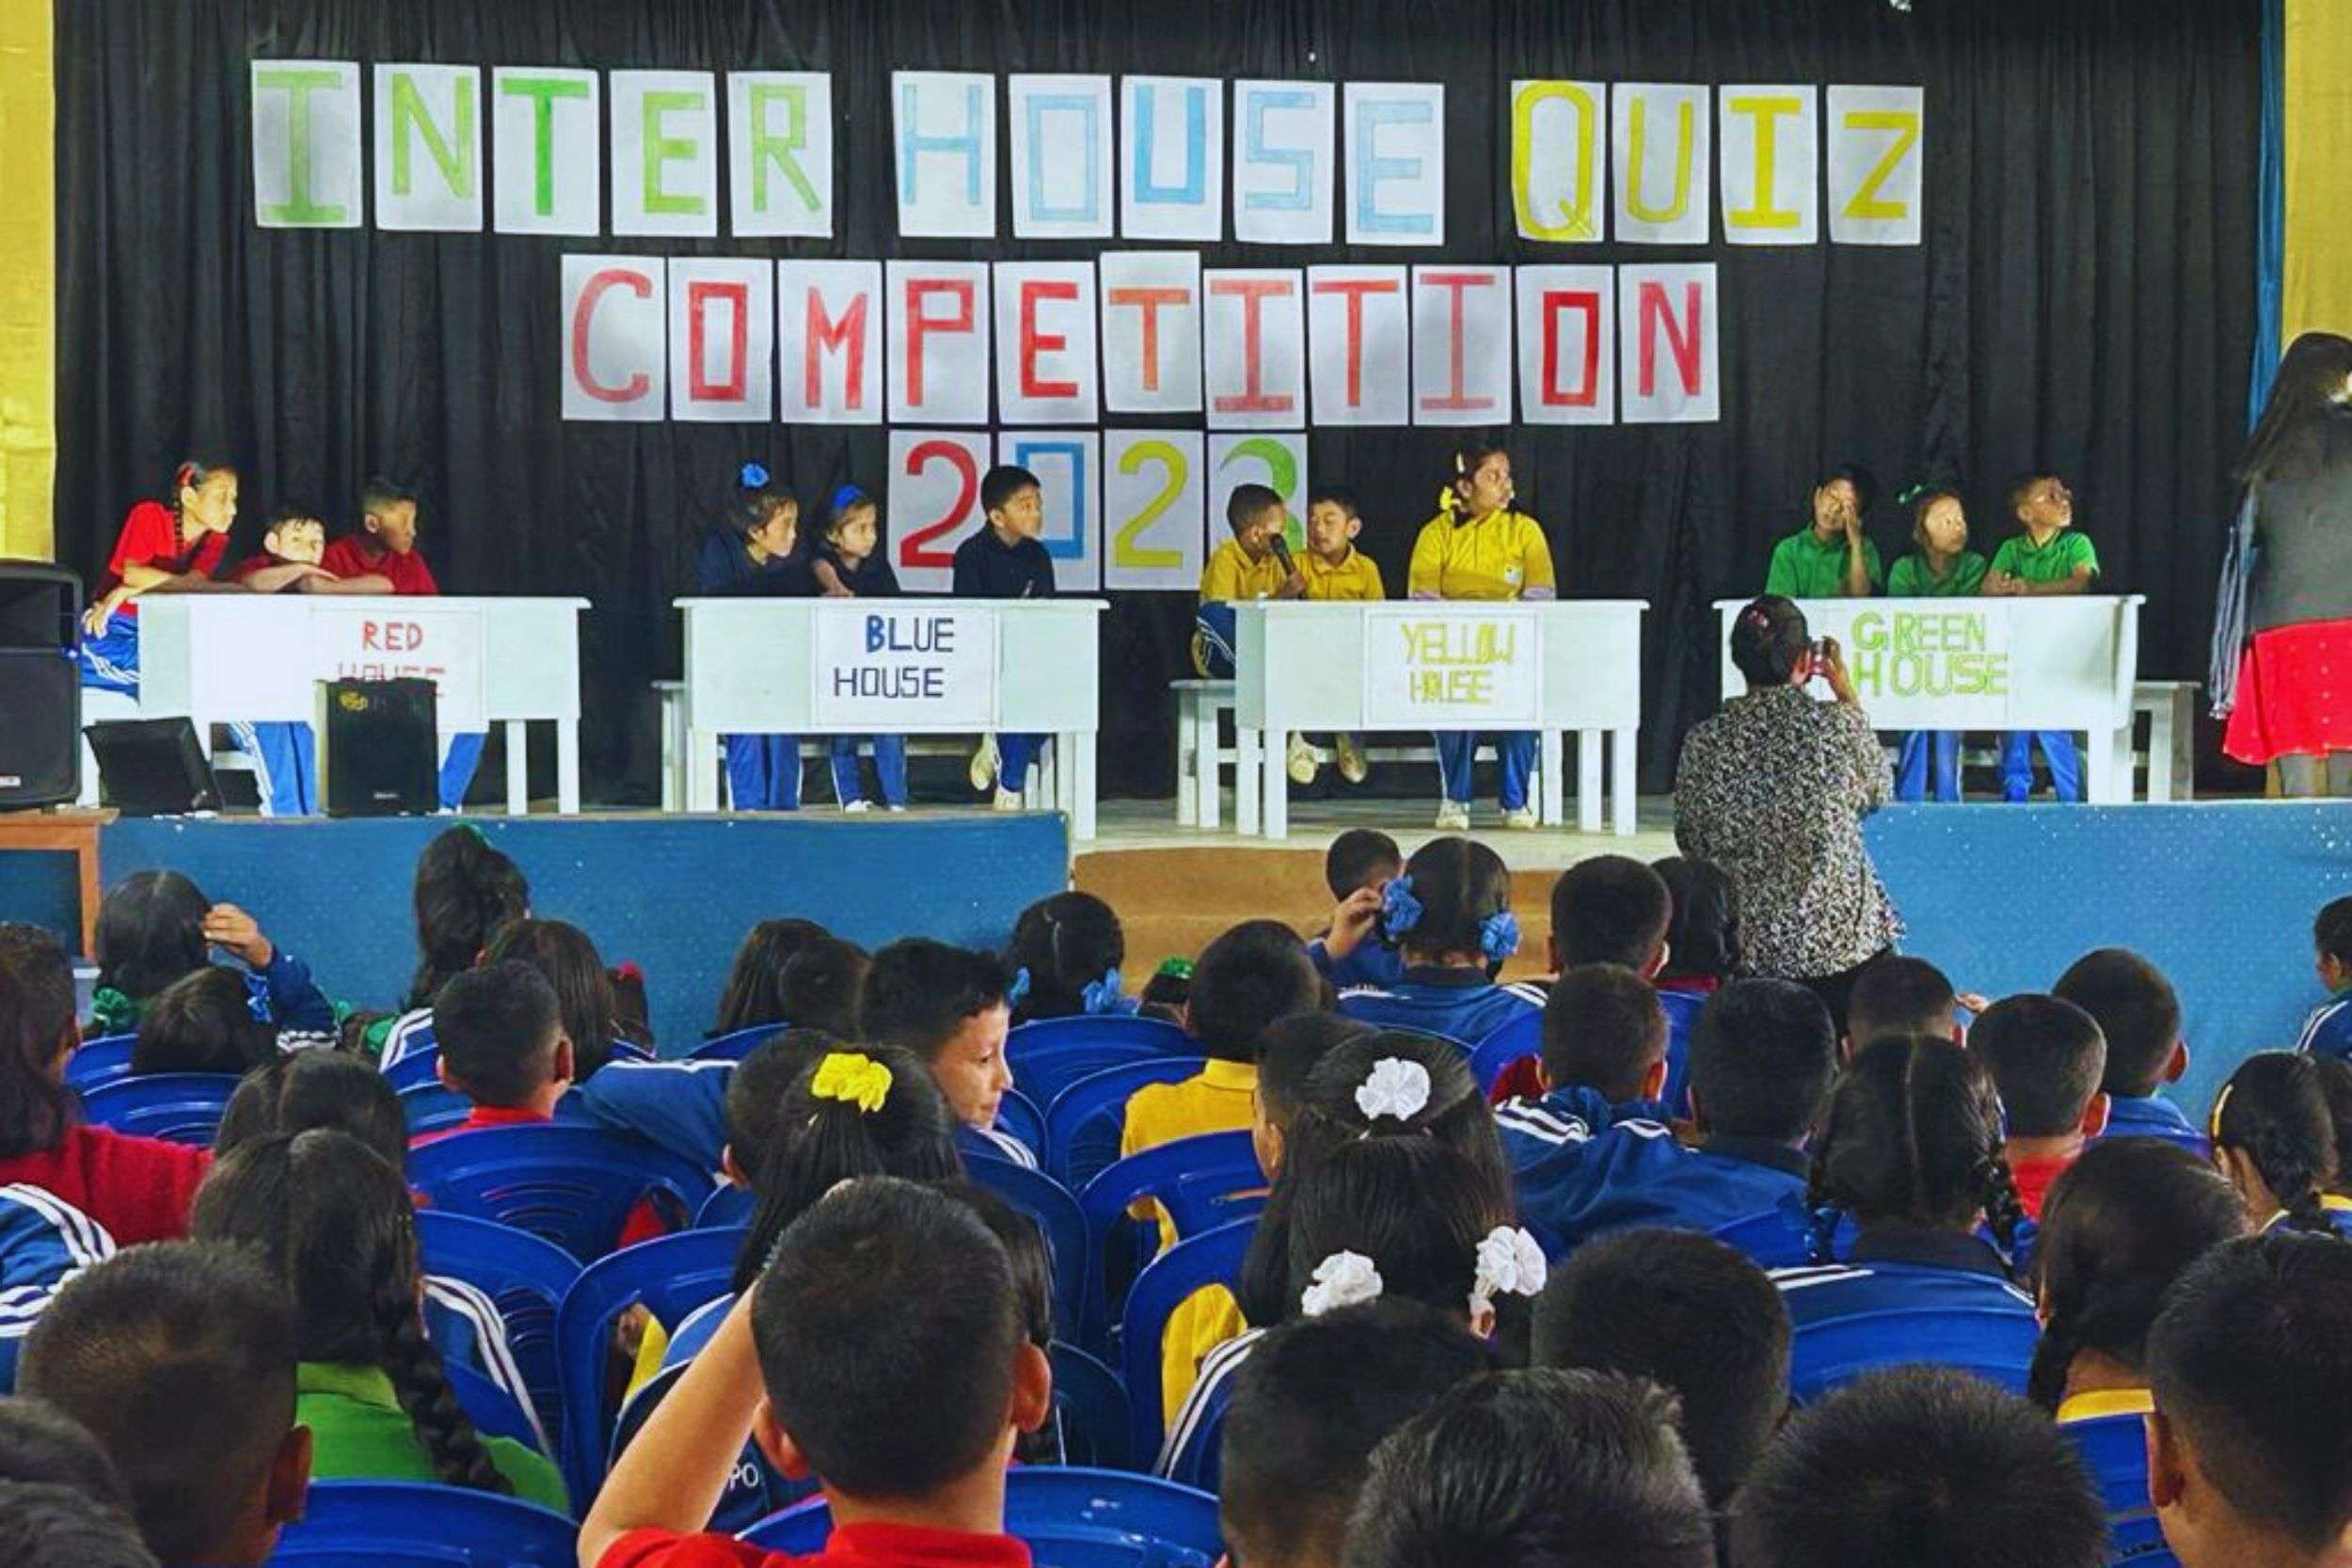 inter house competition ahlis